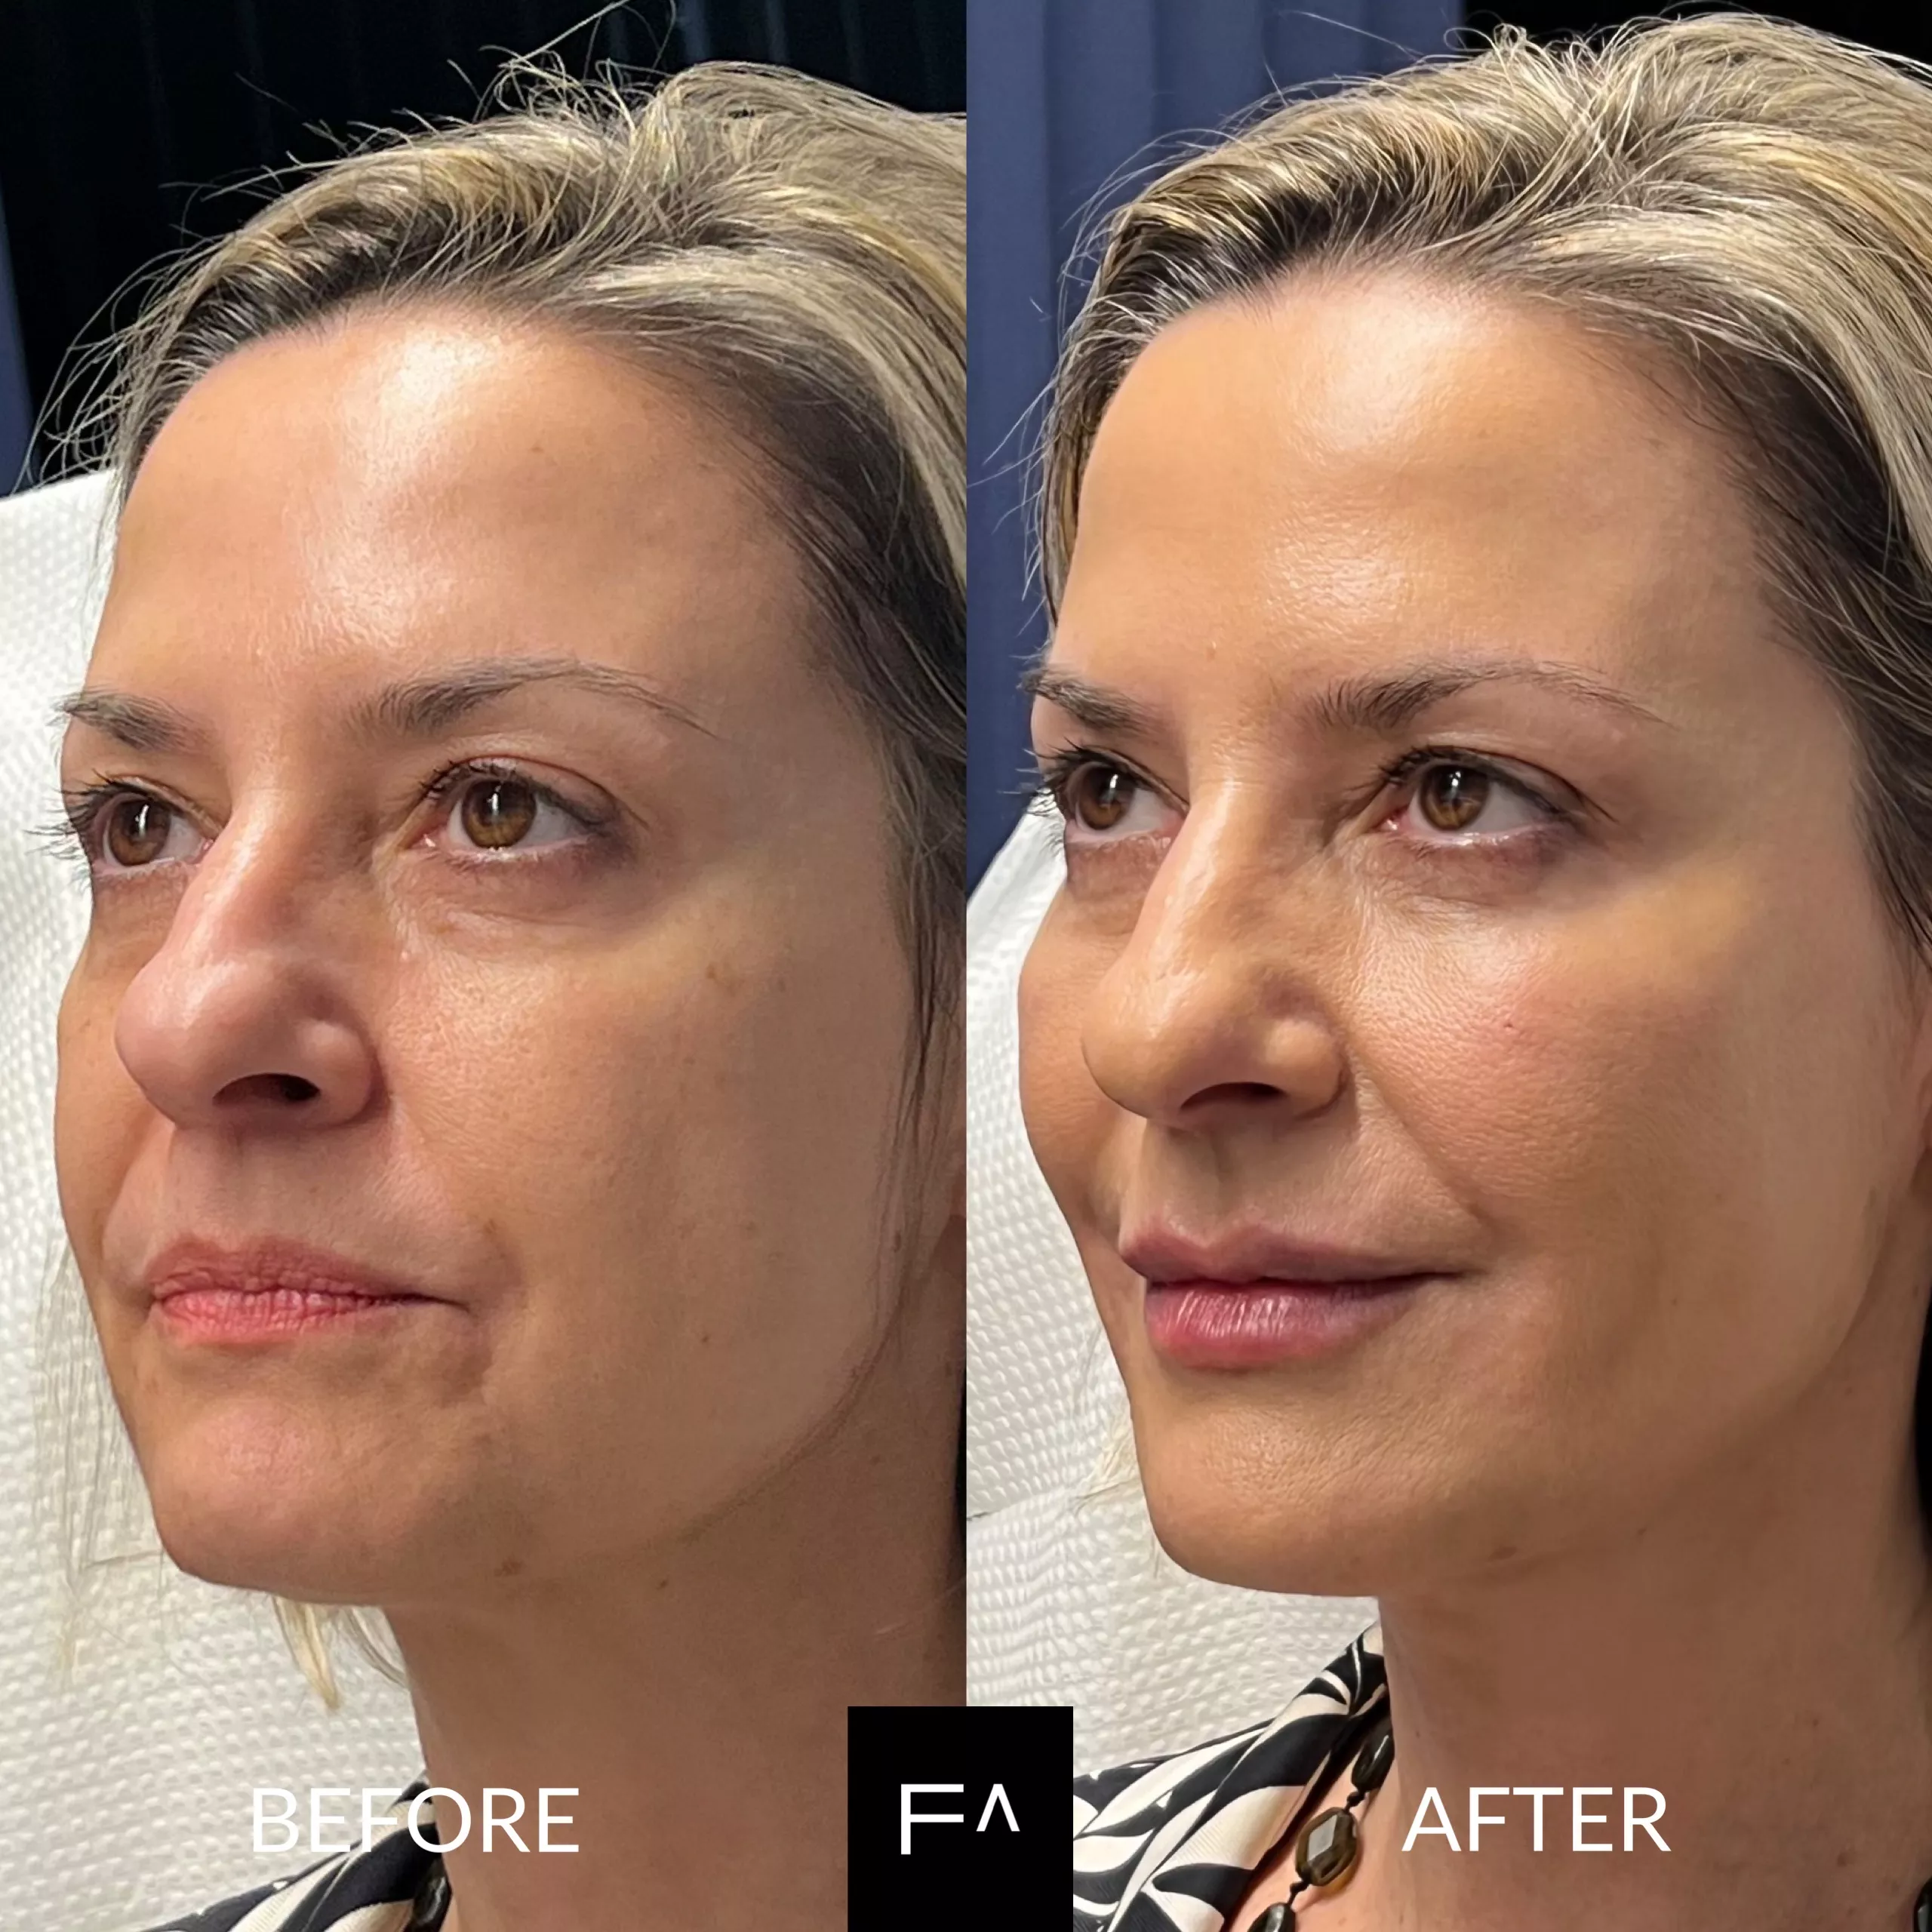 Beautification on woman 2 before & after